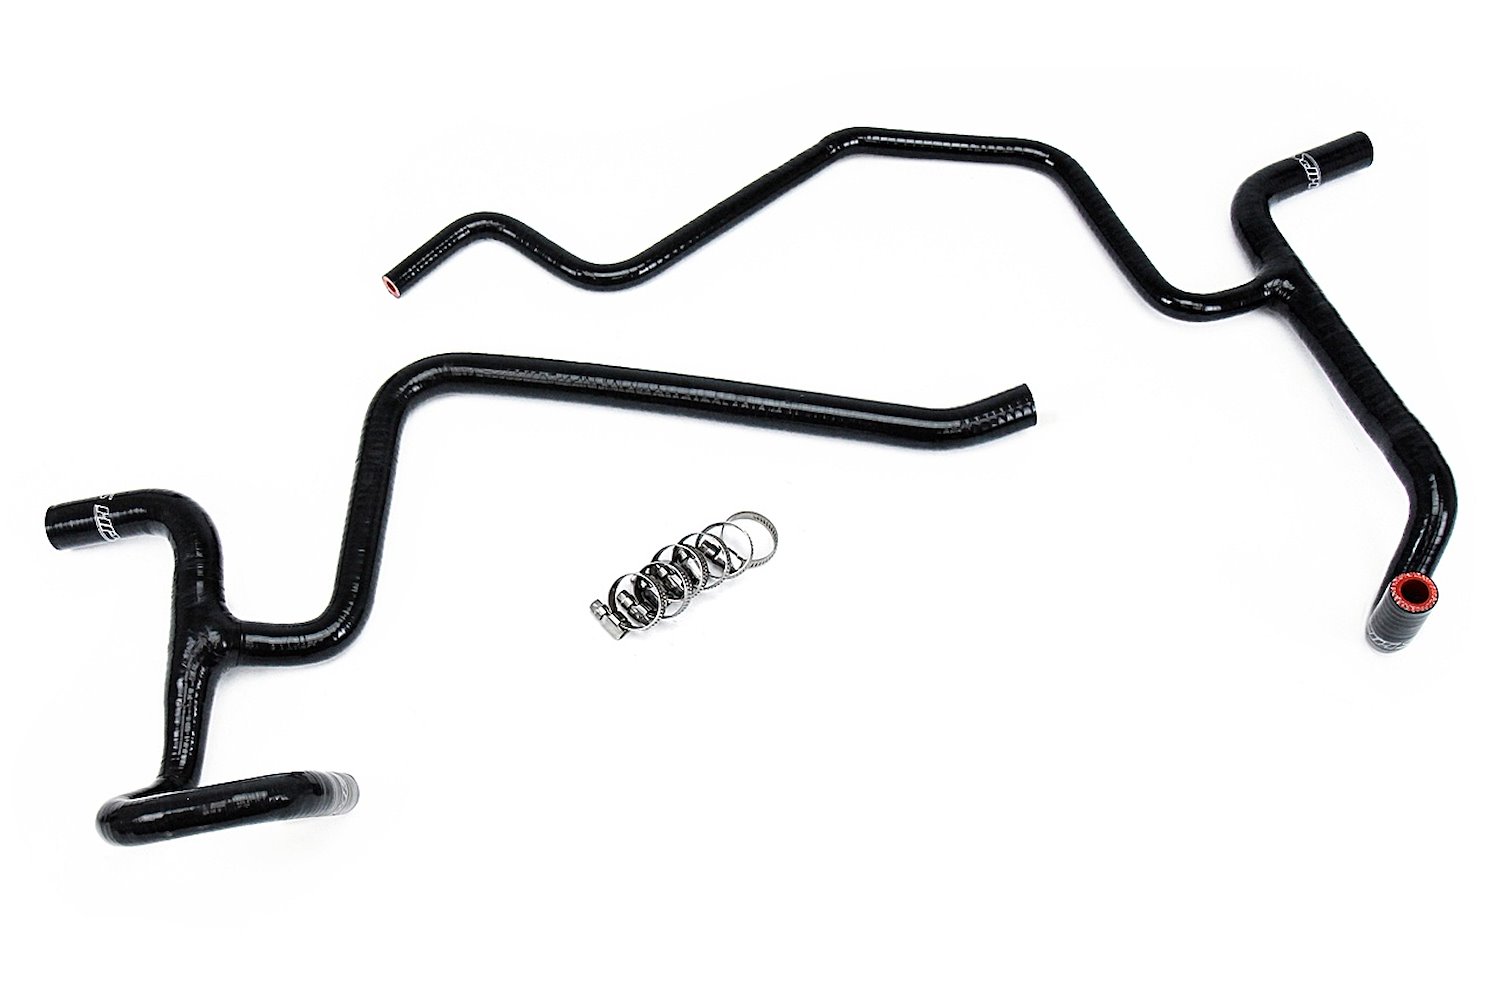 57-1326H-BLK Heater Hose Kit, High-Temp 3-Ply Reinforced Silicone, Replaces OEM Rubber Heater Coolant Hoses